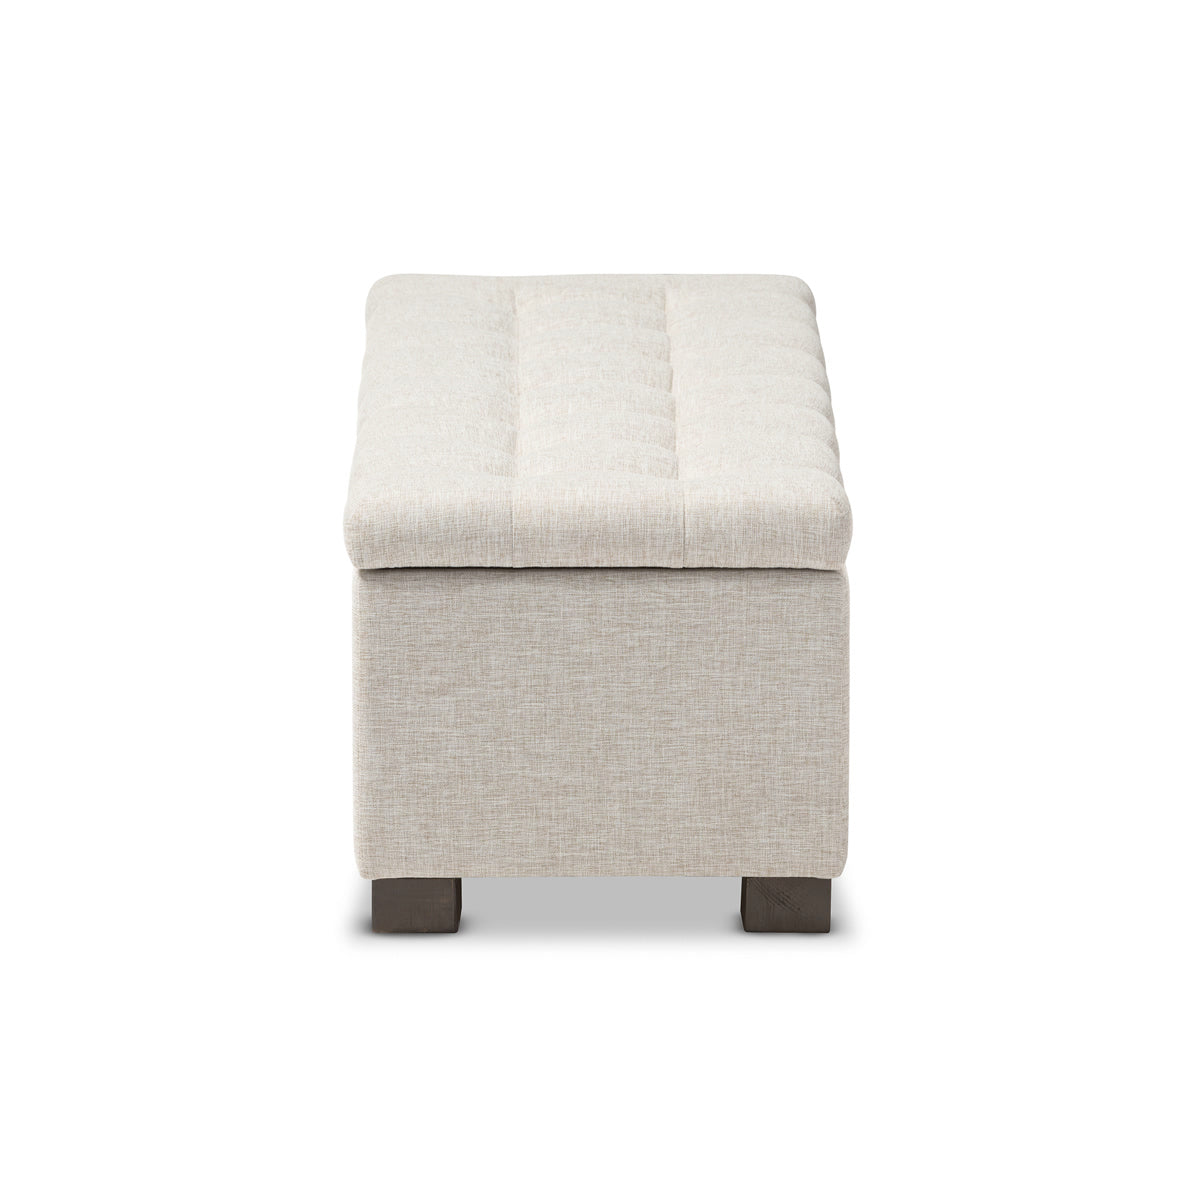 Baxton Studio Roanoke Modern and Contemporary Beige Fabric Upholstered Grid-Tufting Storage Ottoman Bench Baxton Studio-benches-Minimal And Modern - 5